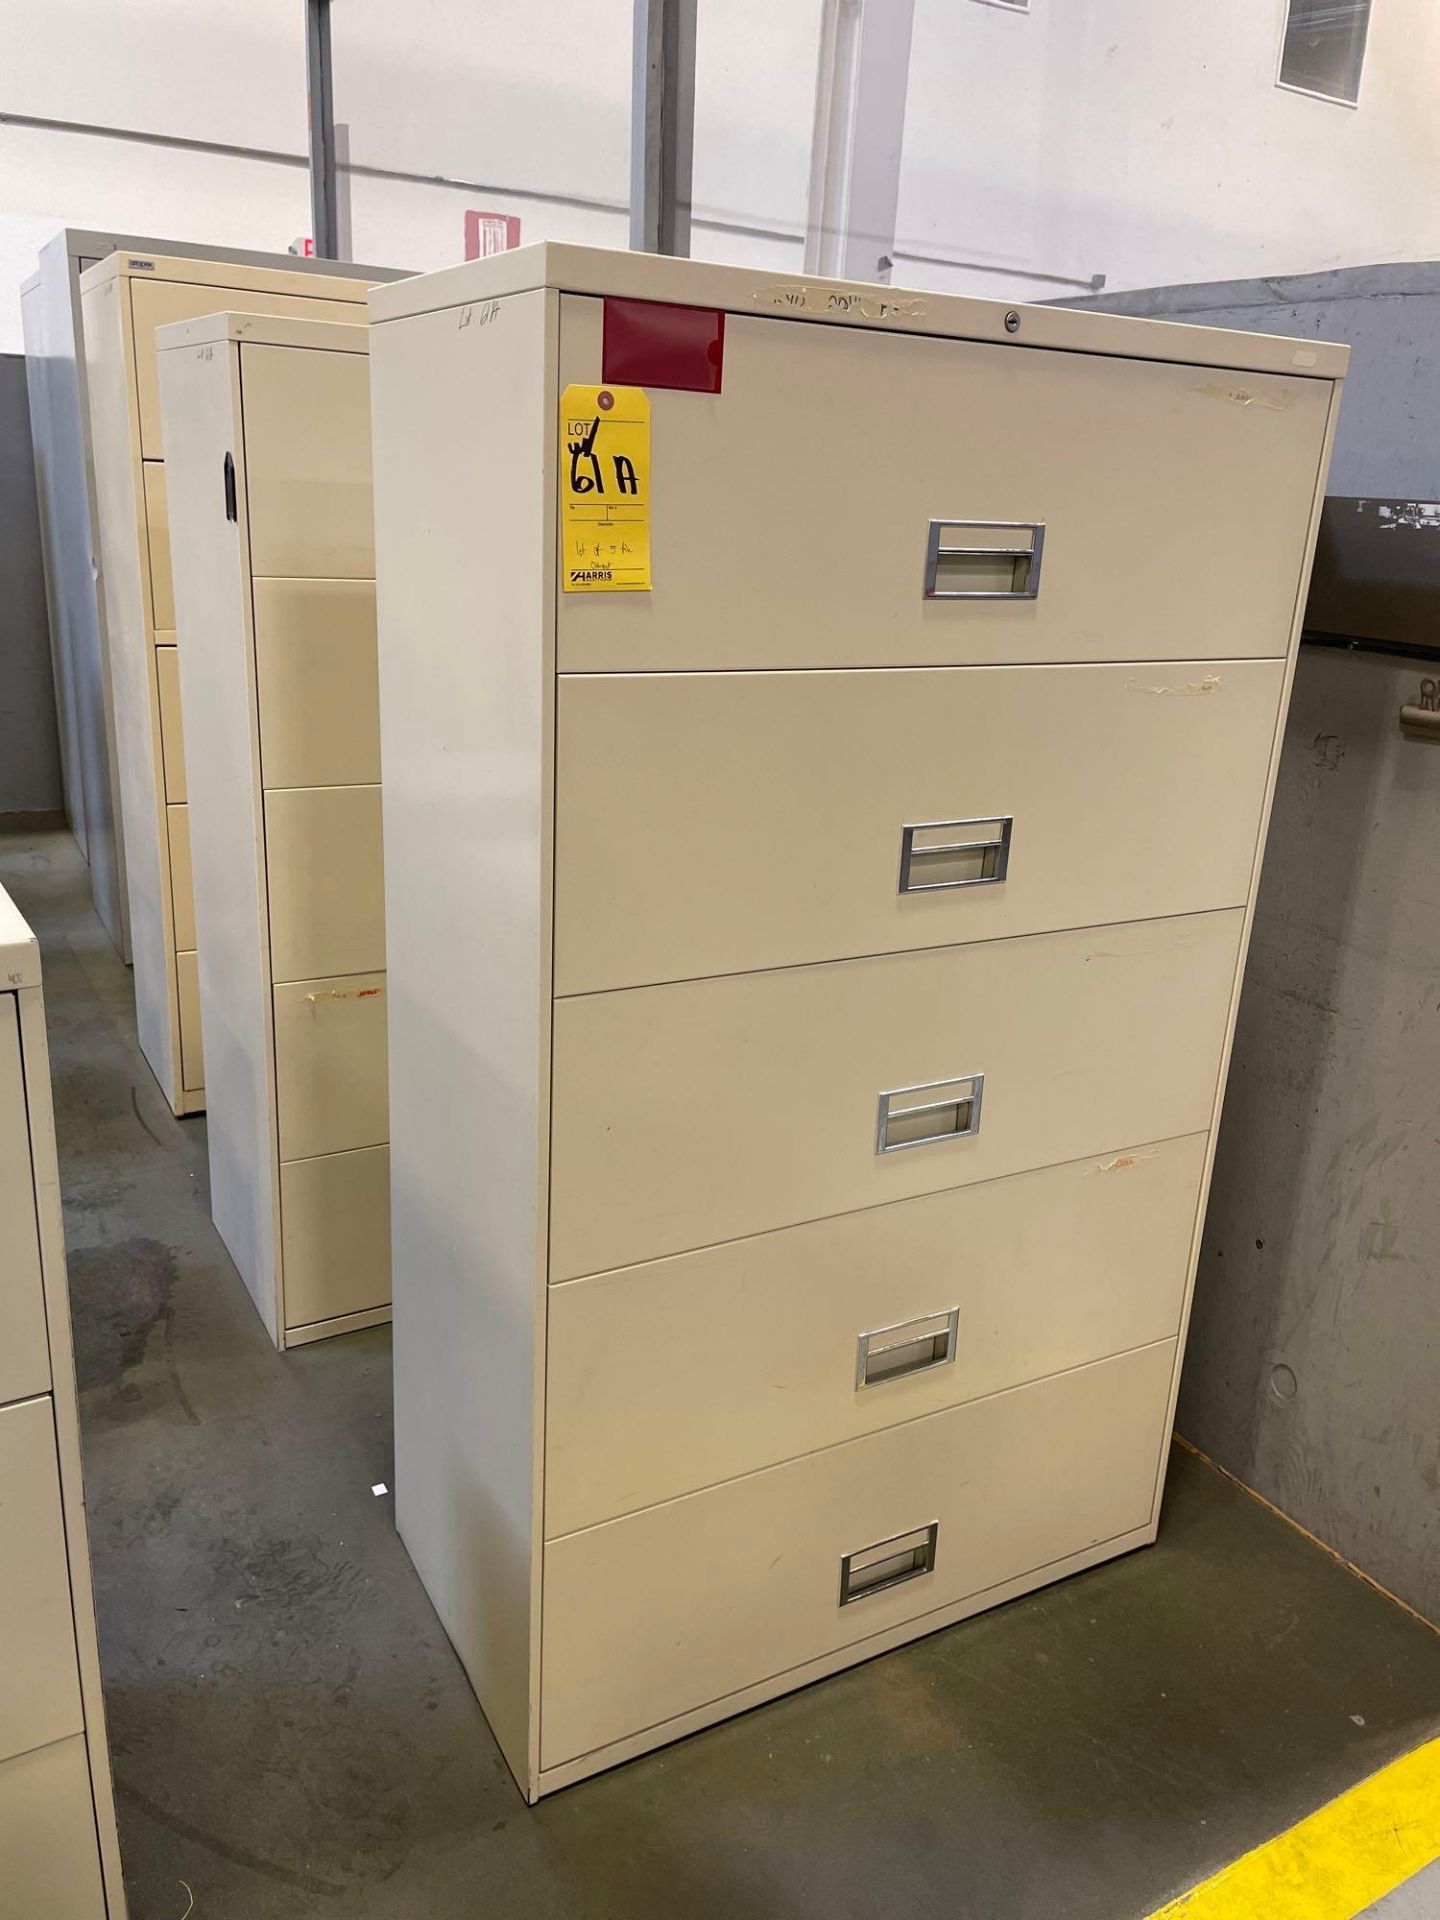 Lot of 5 File Cabinets, 5 Drawer: (4) 36" X 18" X 60", (1) 36" X 18" X 66"